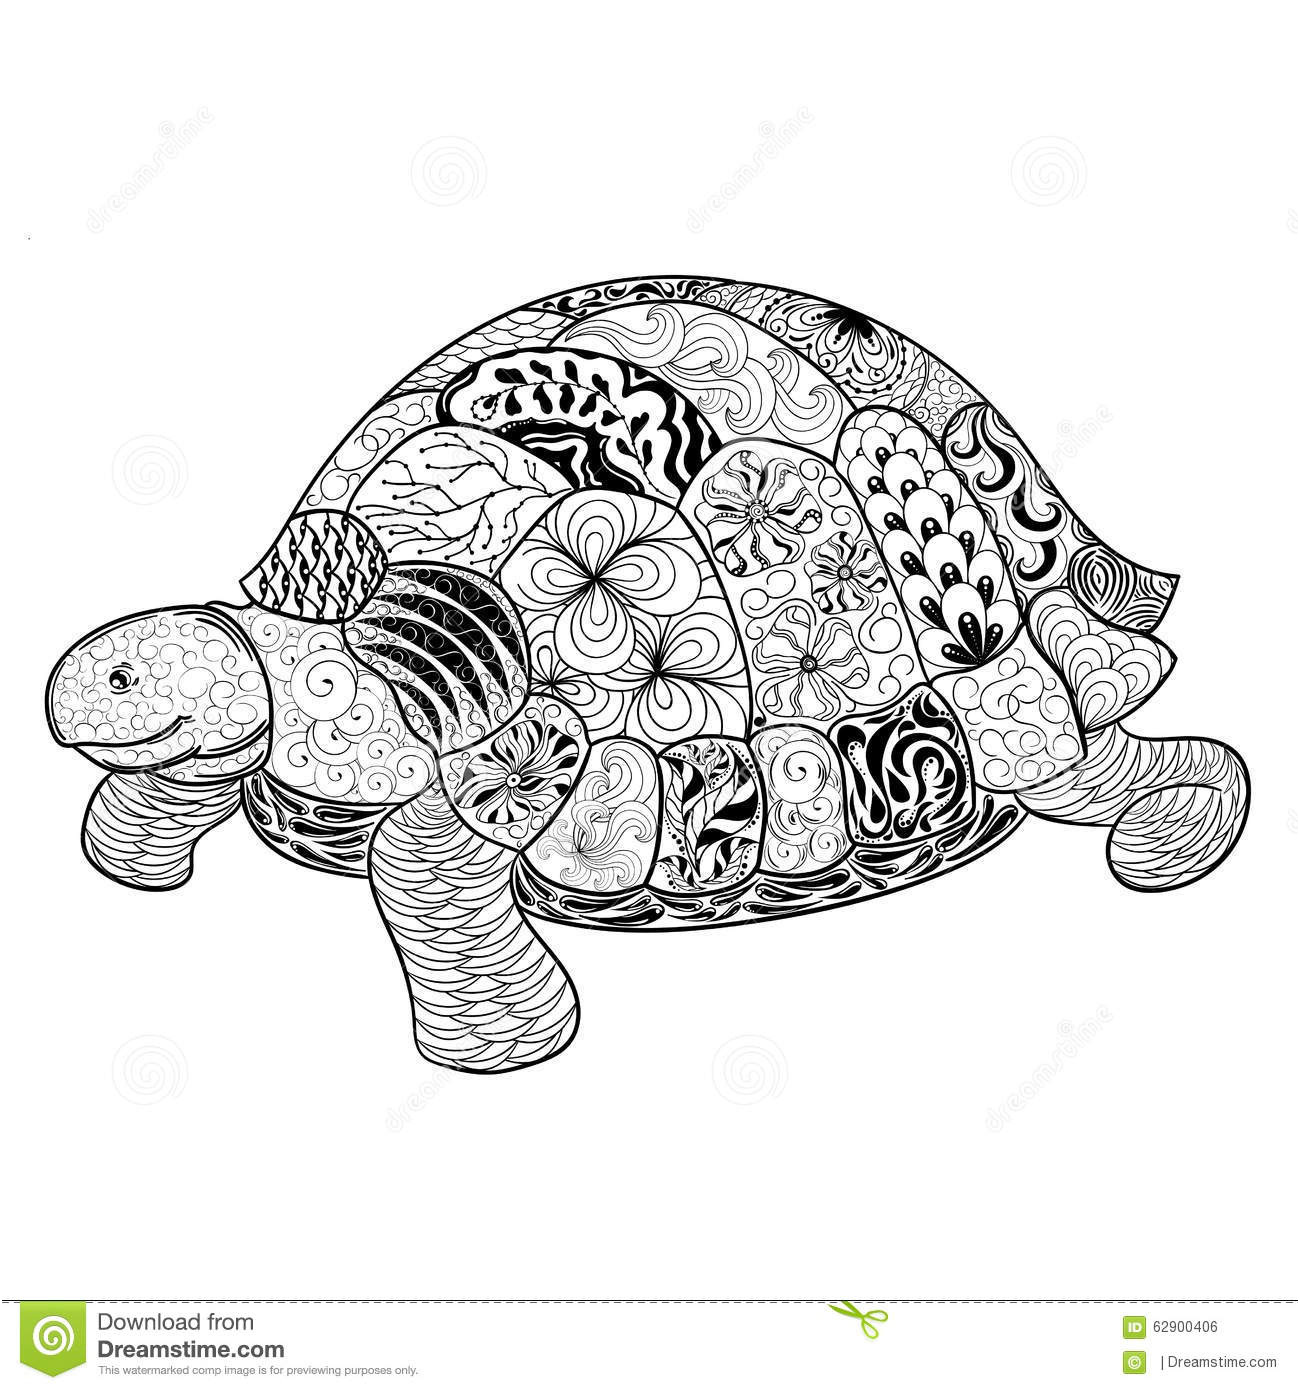 coloriage mandala animaux tortue nice tortue coloriages d animaux mandalas zen and anti